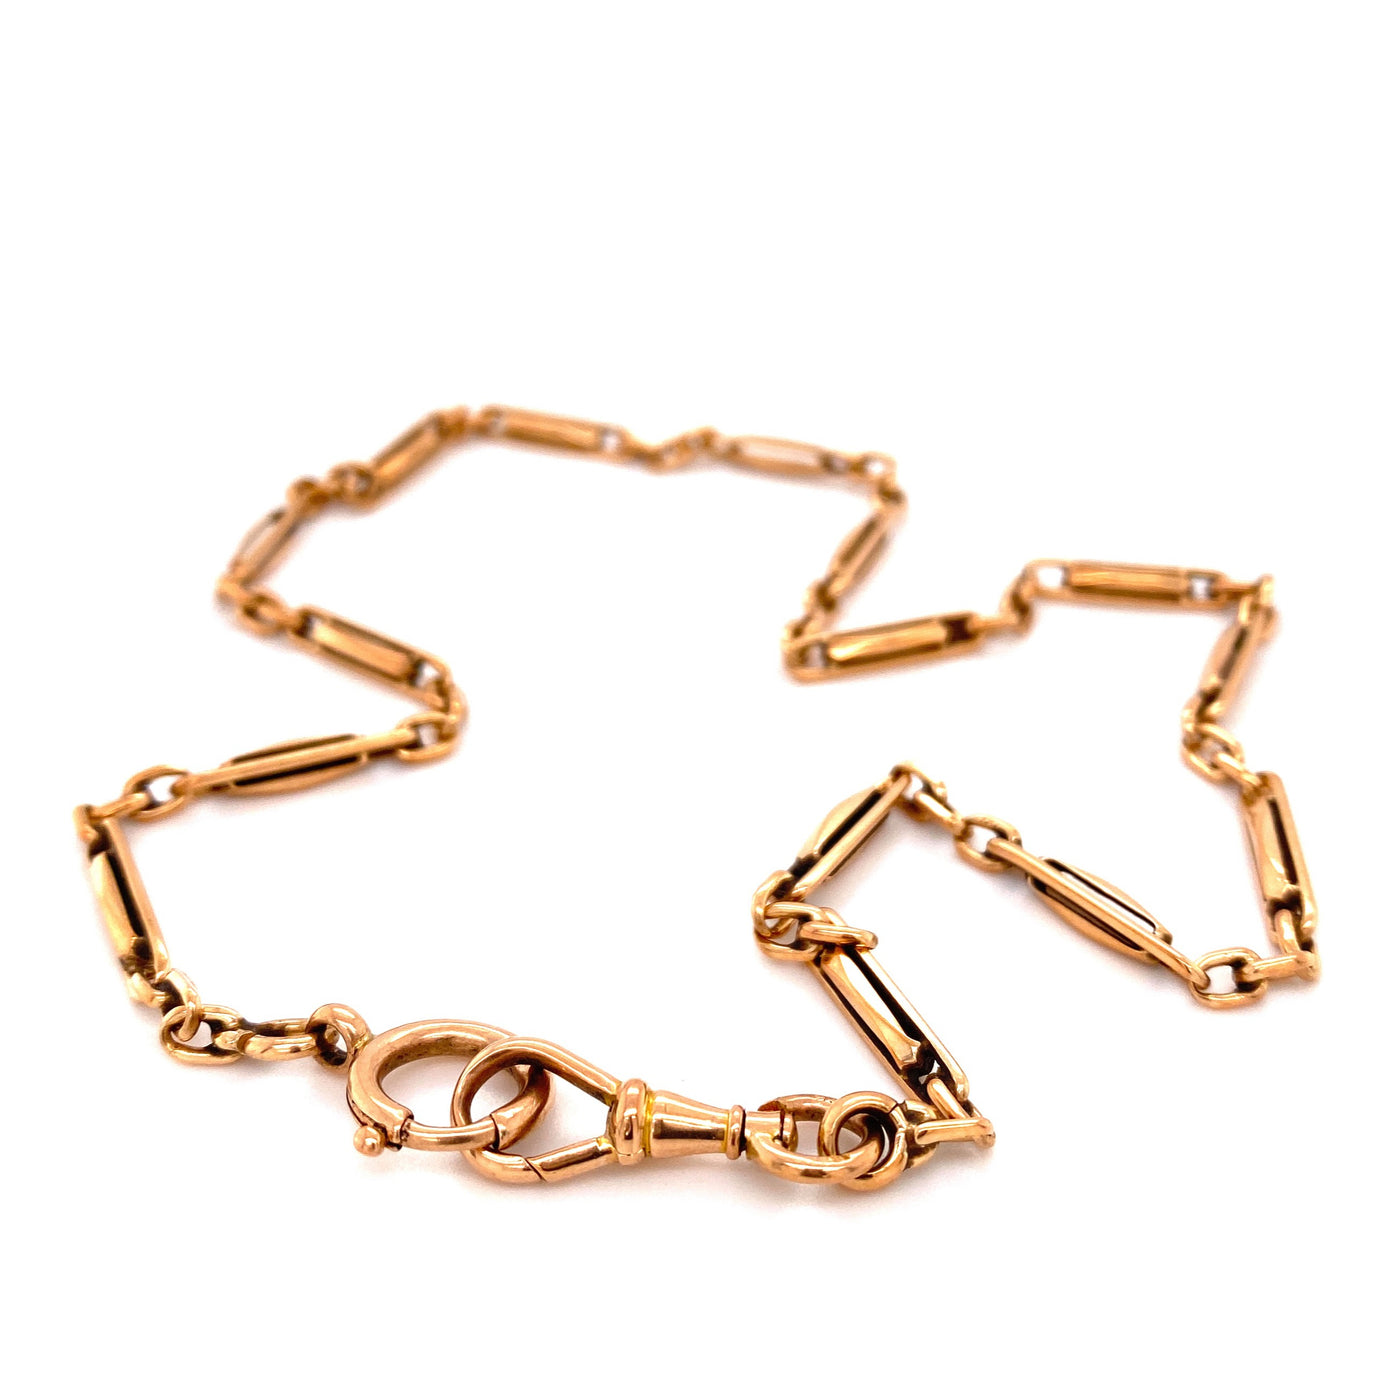 Links and Loops - Coole Goldkette